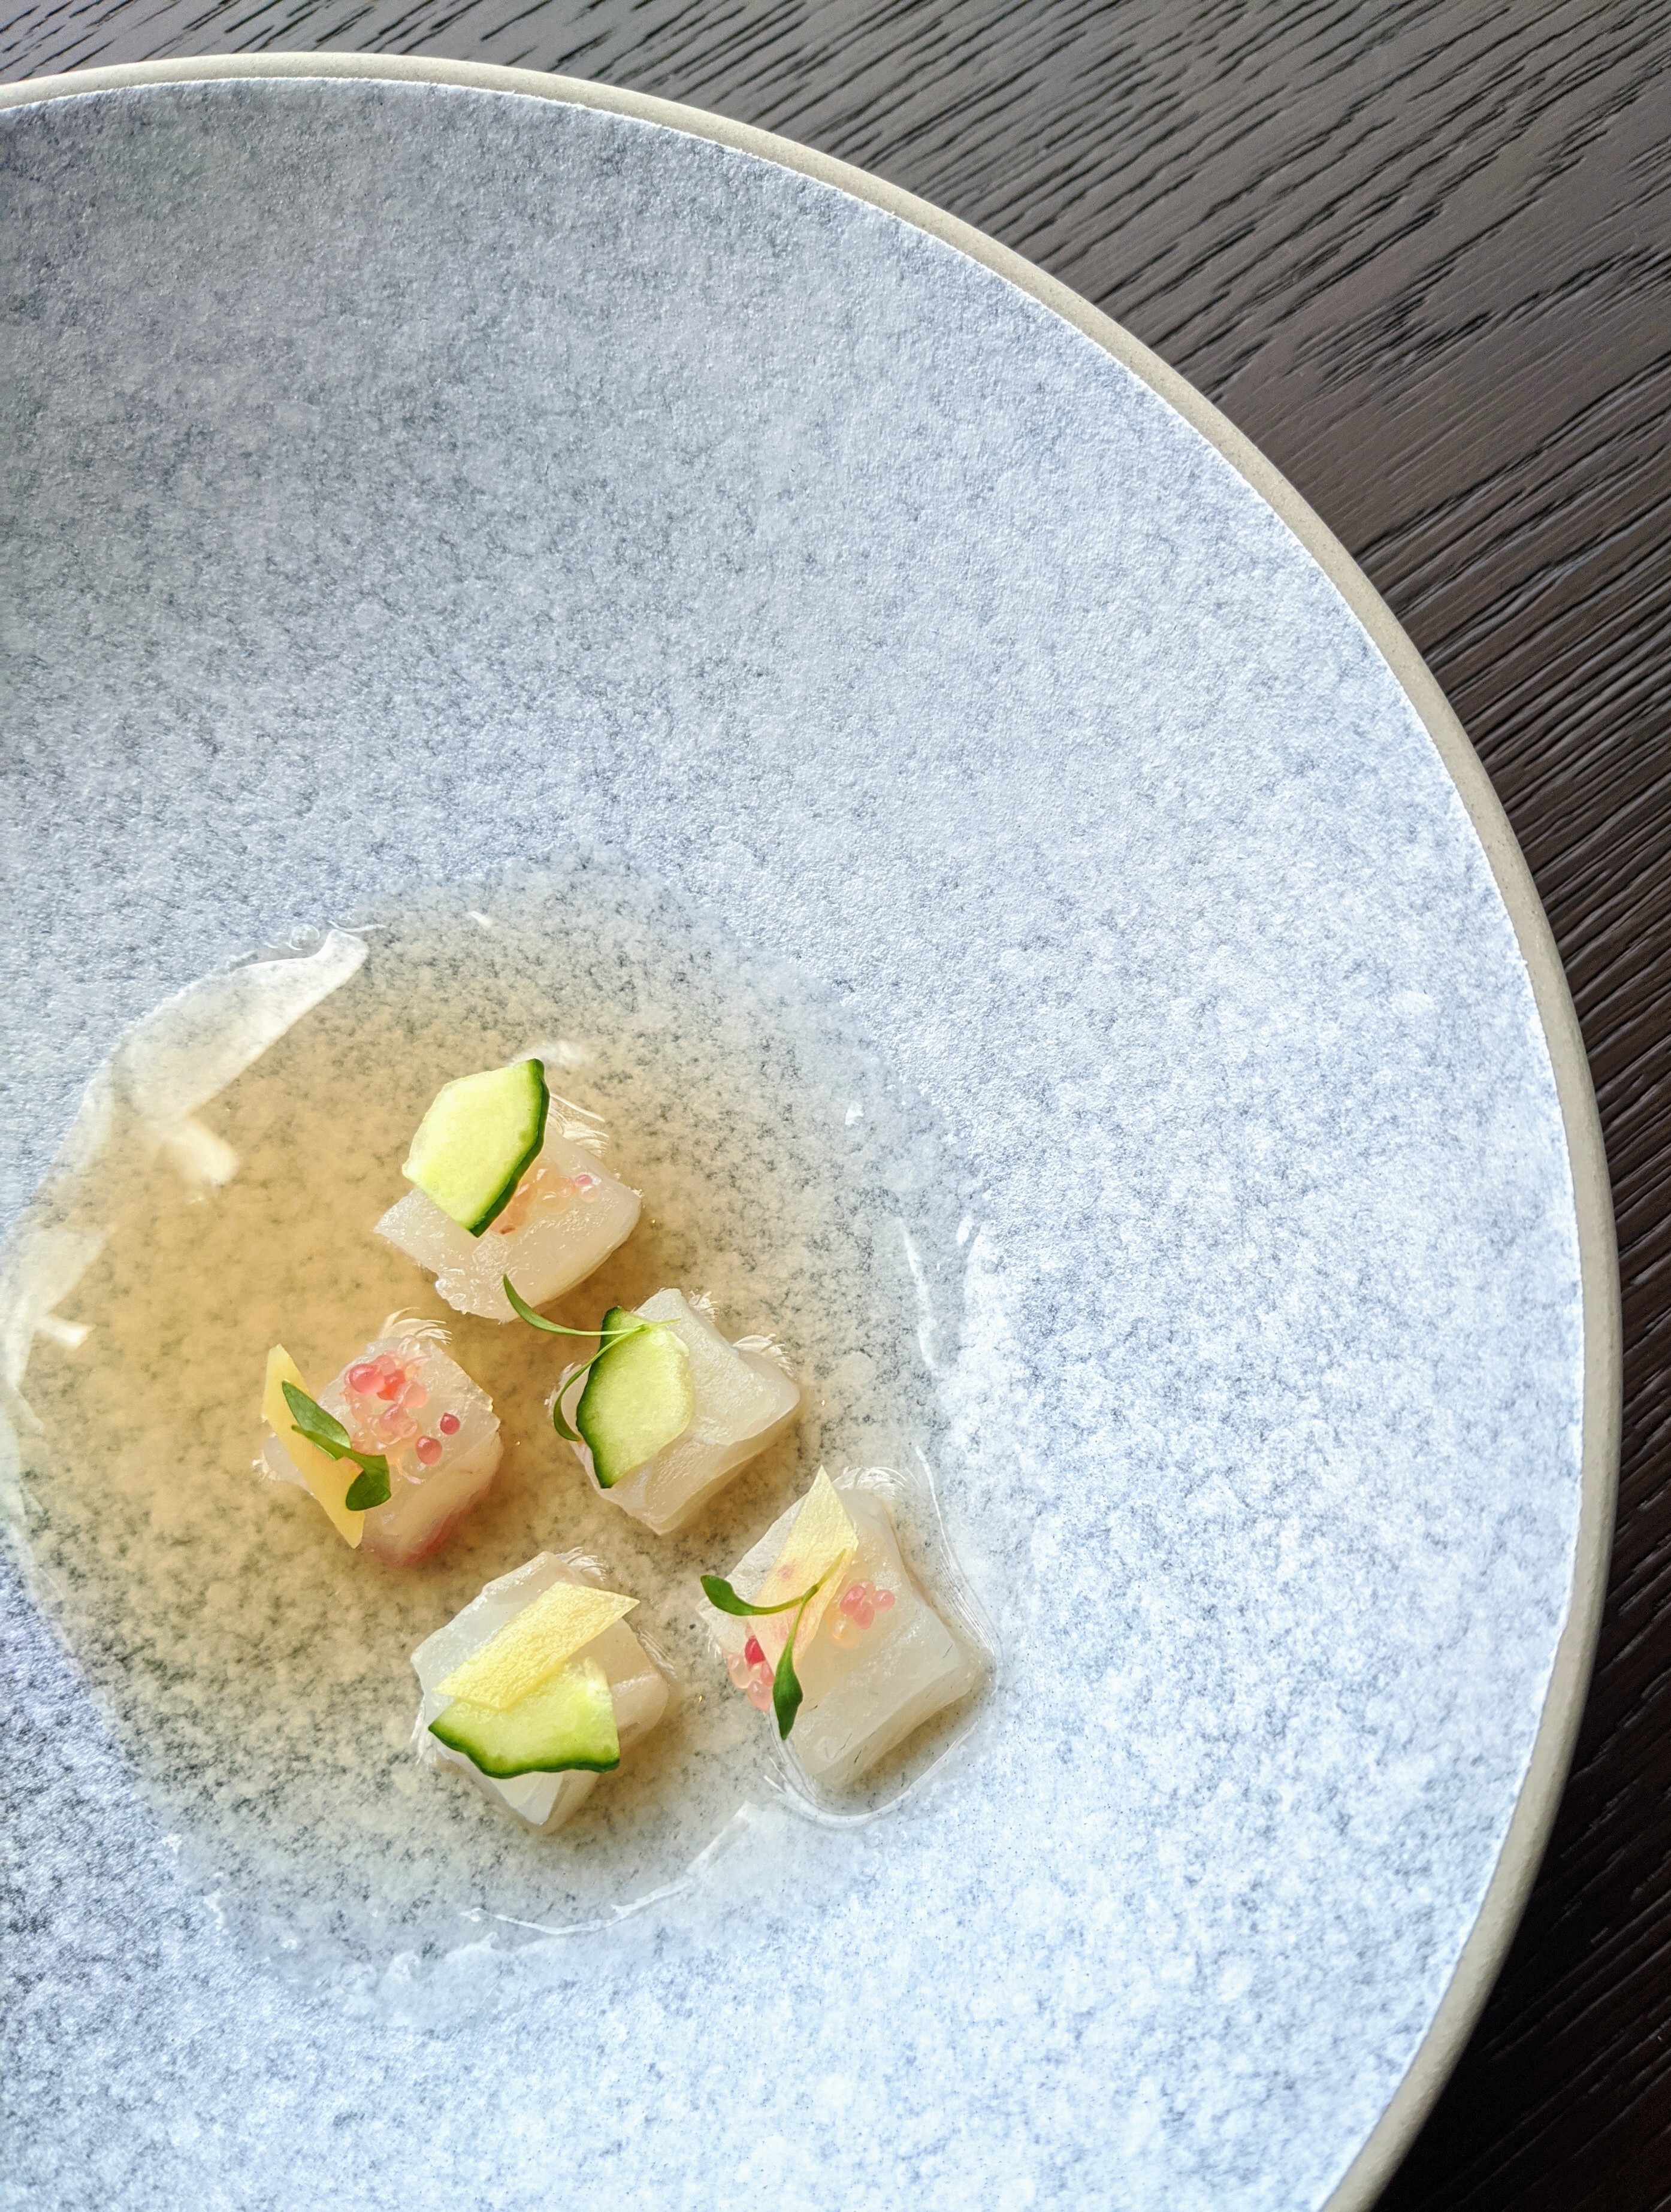 Japanese sea bream gazpacho, a dish from the Abstract Experience menu at Cobo House at K11 Musea. Photo: handout